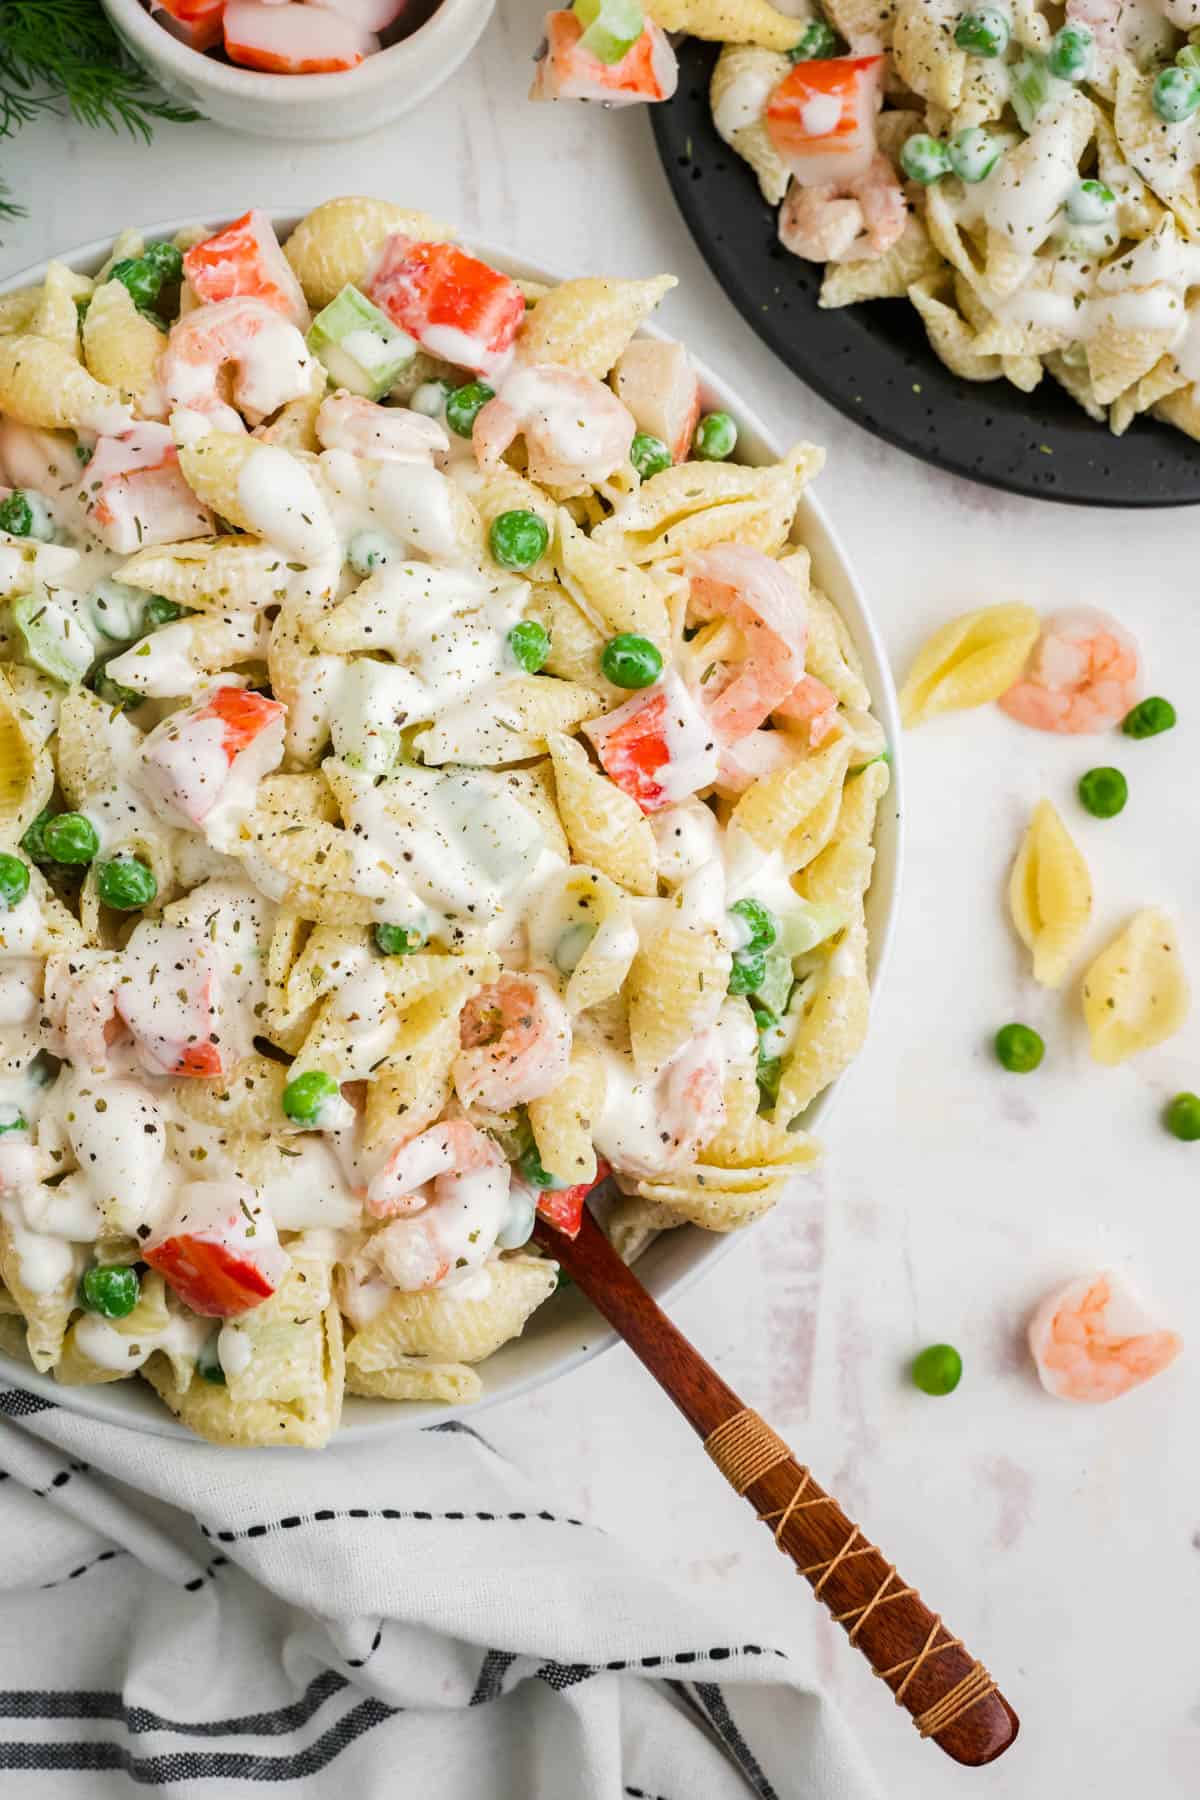 A spoon in a large serving bowl of pasta salad with shrimp.